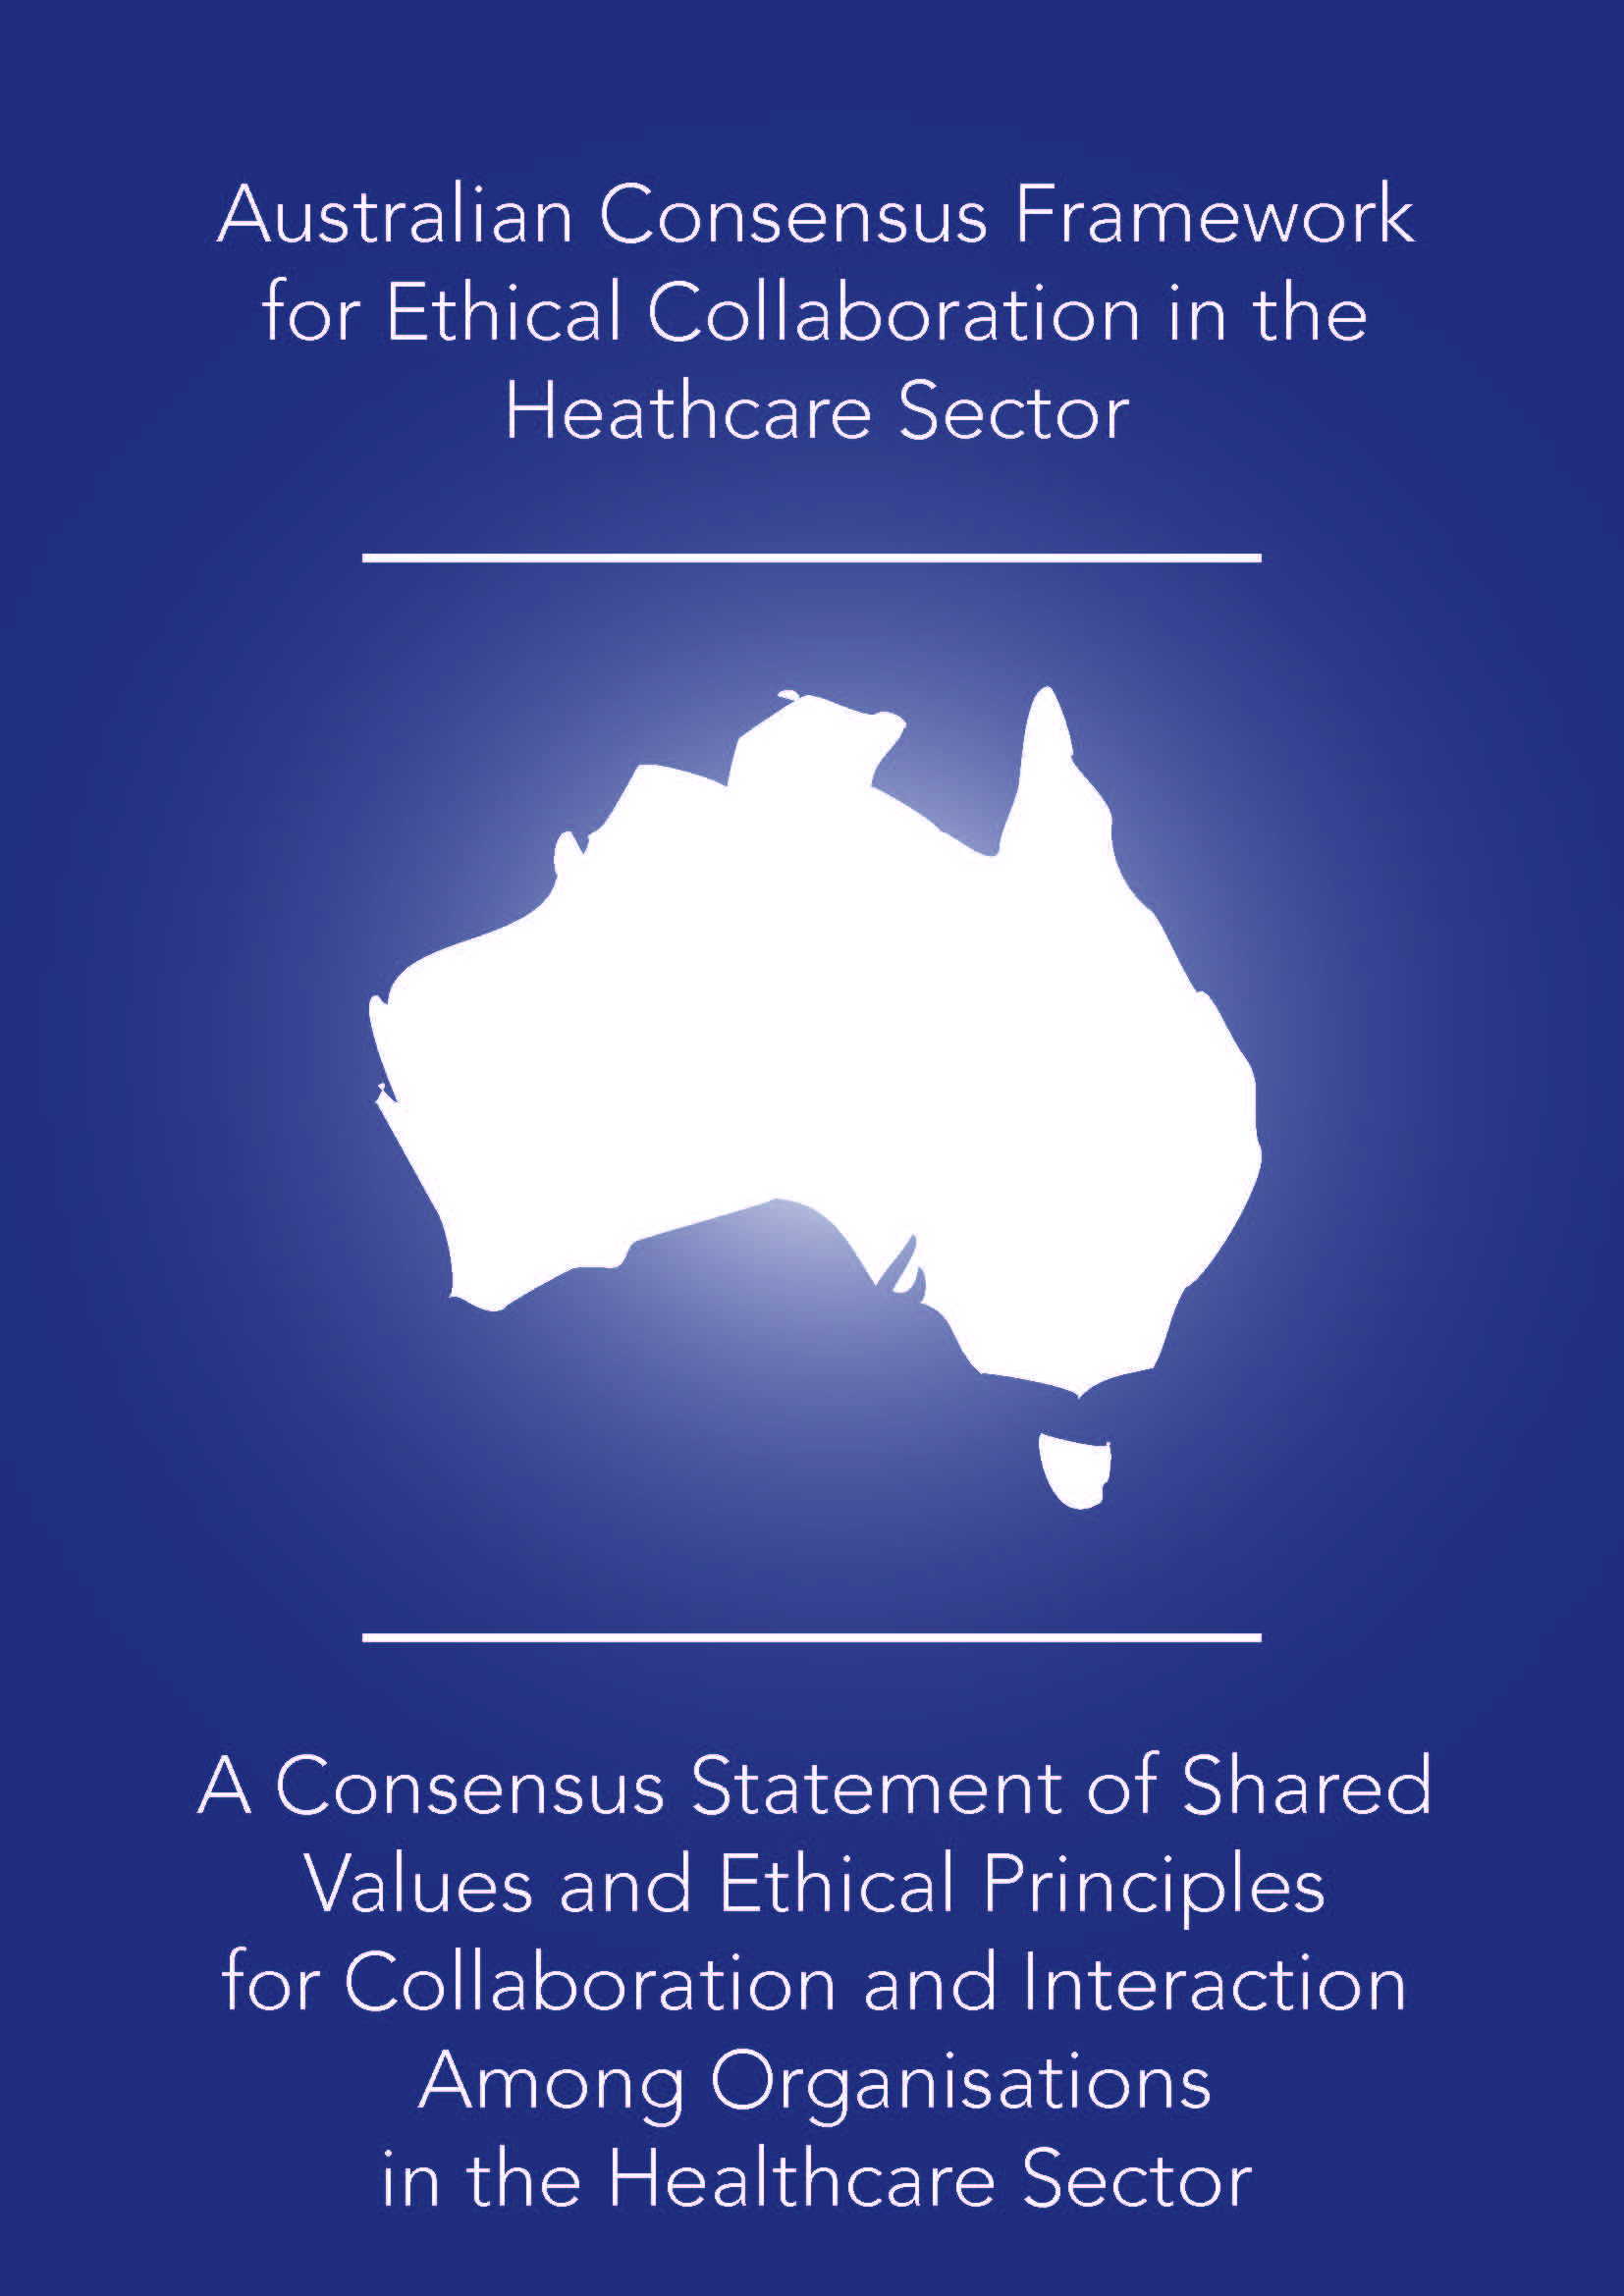 australian-consensus-framework-for-ethical-collaboration-in-the-healthcare-sectorpage01.jpg